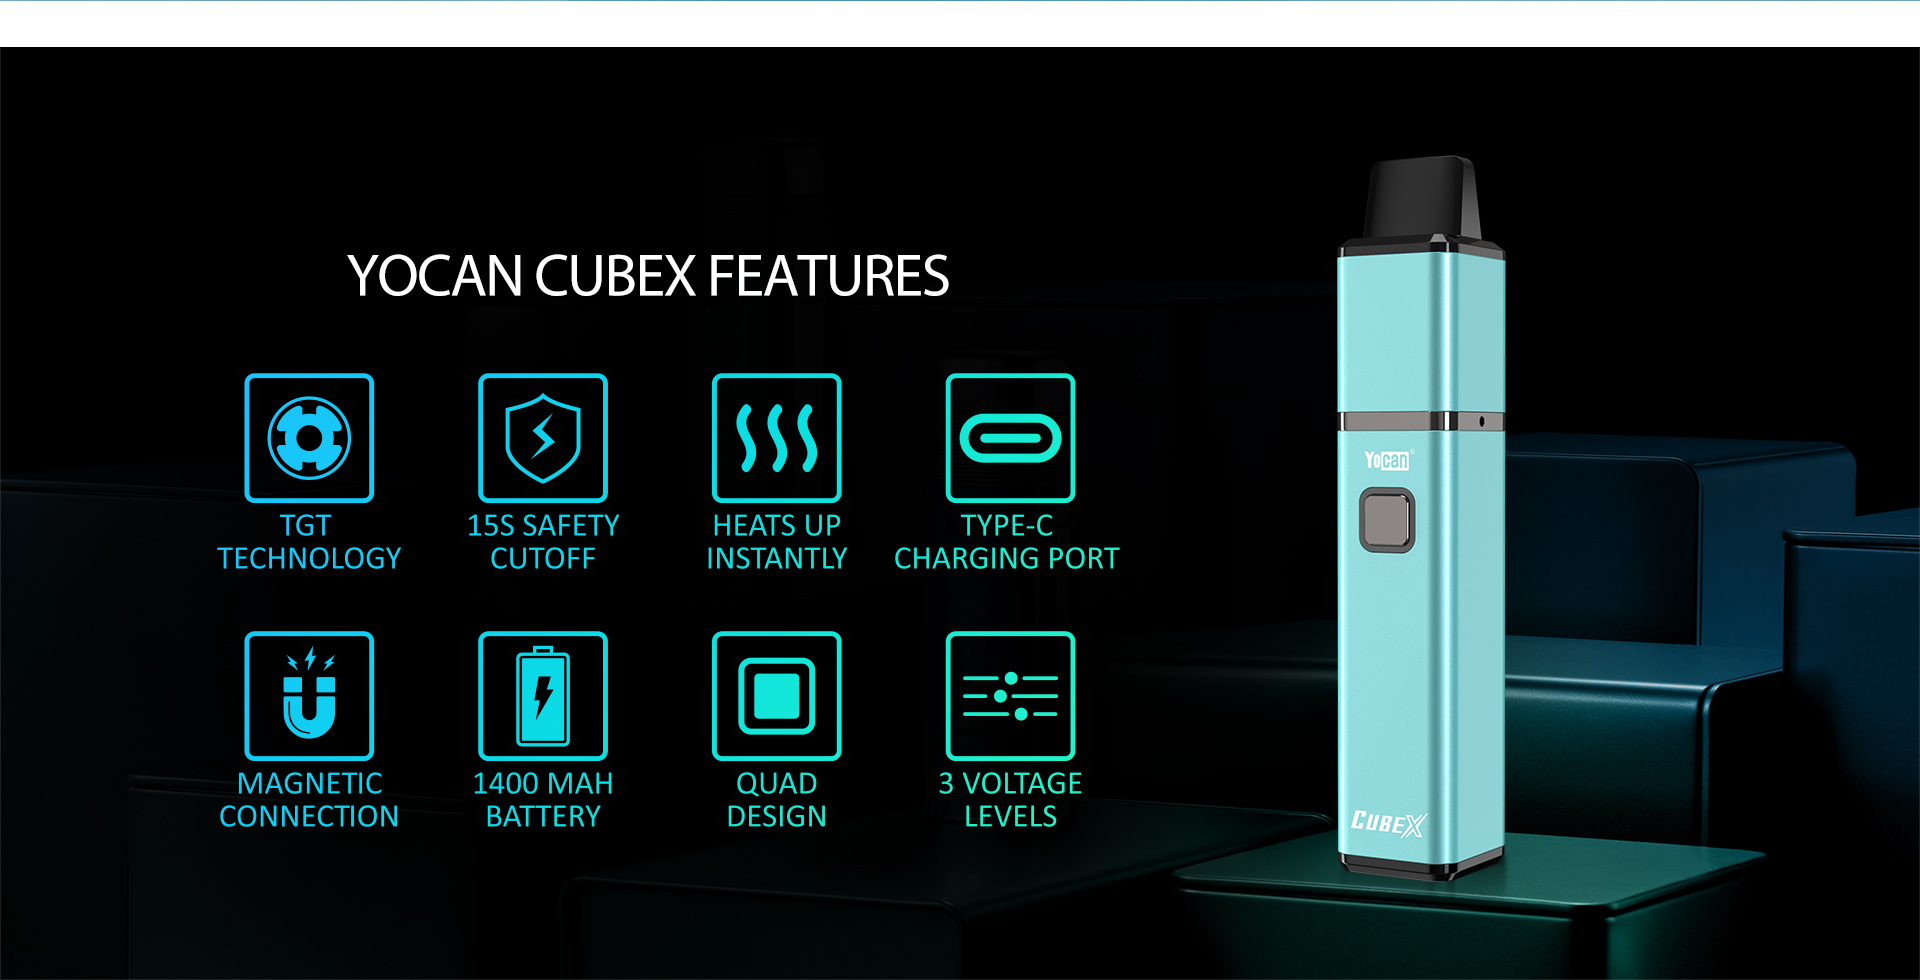 Features of the Yocan Cubex concentrate vape pen